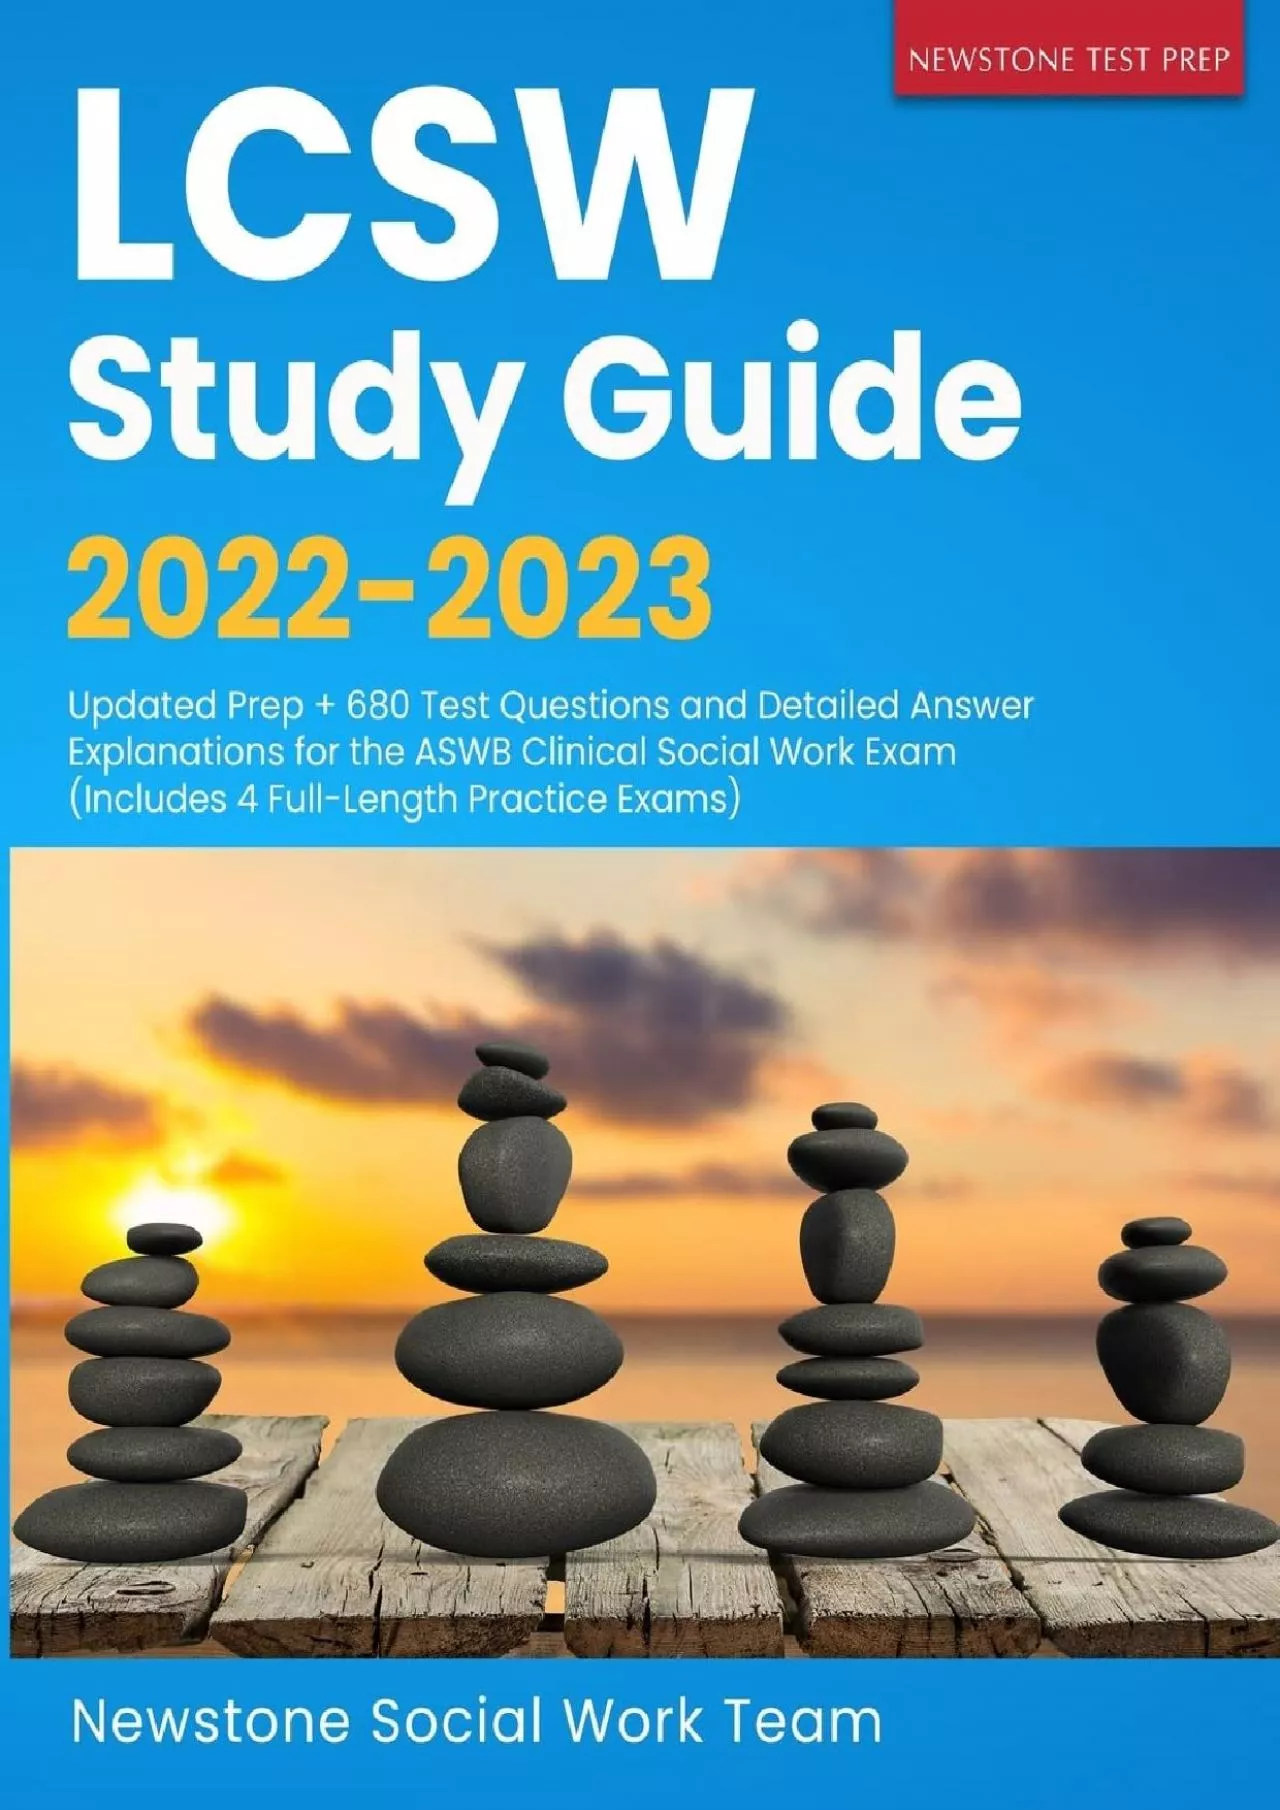 [DOWNLOAD] LCSW Study Guide 2022-2023: Updated Prep + 680 Test Questions and Detailed